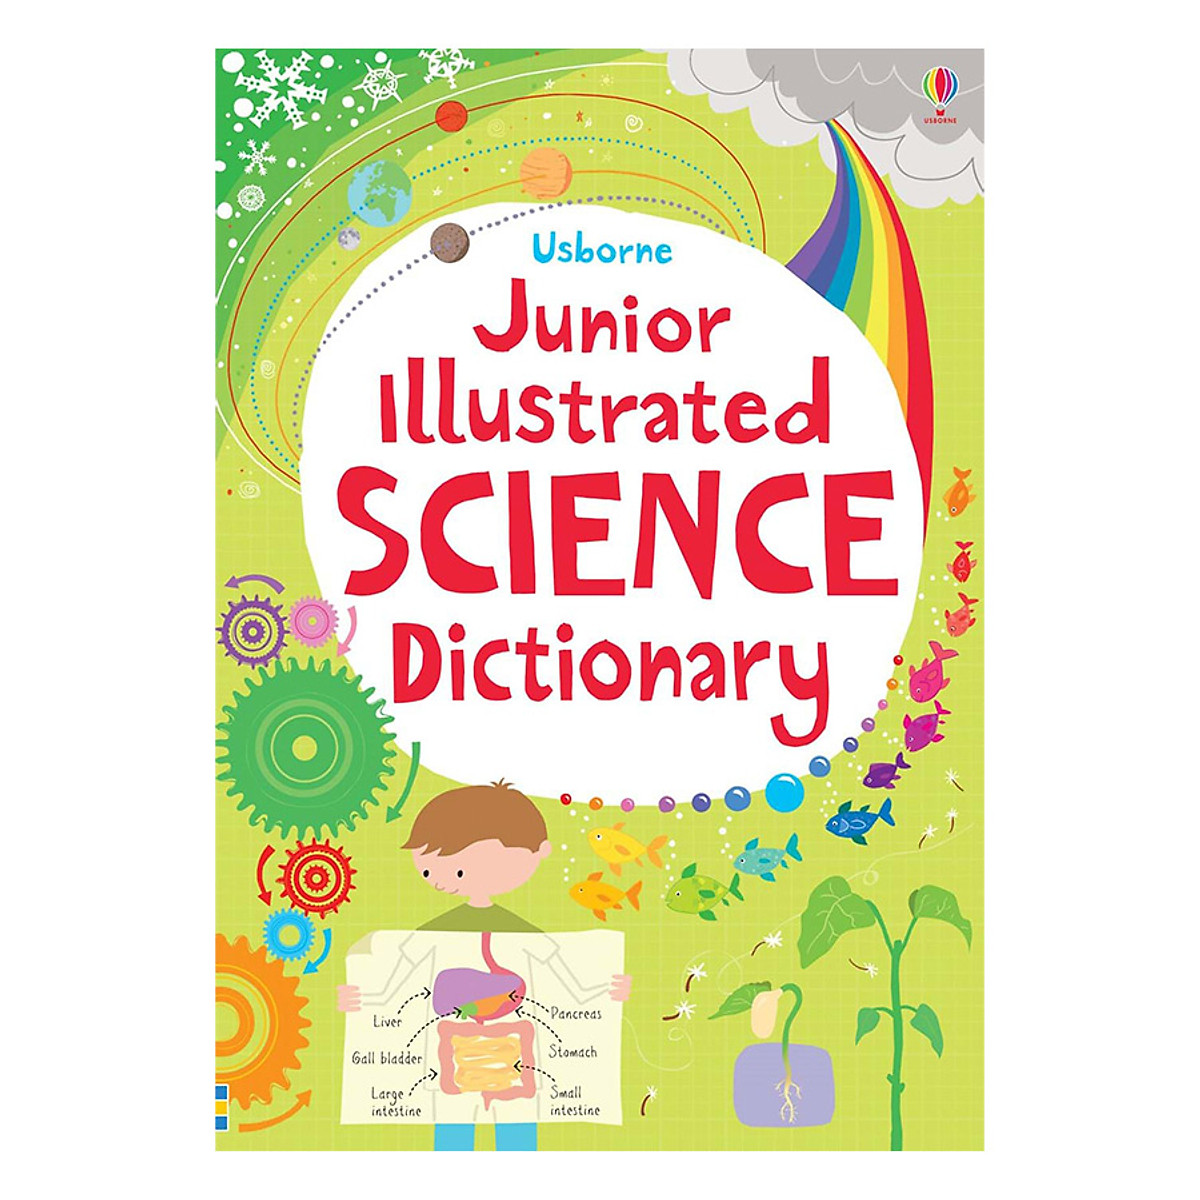 Sách tiếng Anh - Usborne Junior Illustrated Science Dictionary